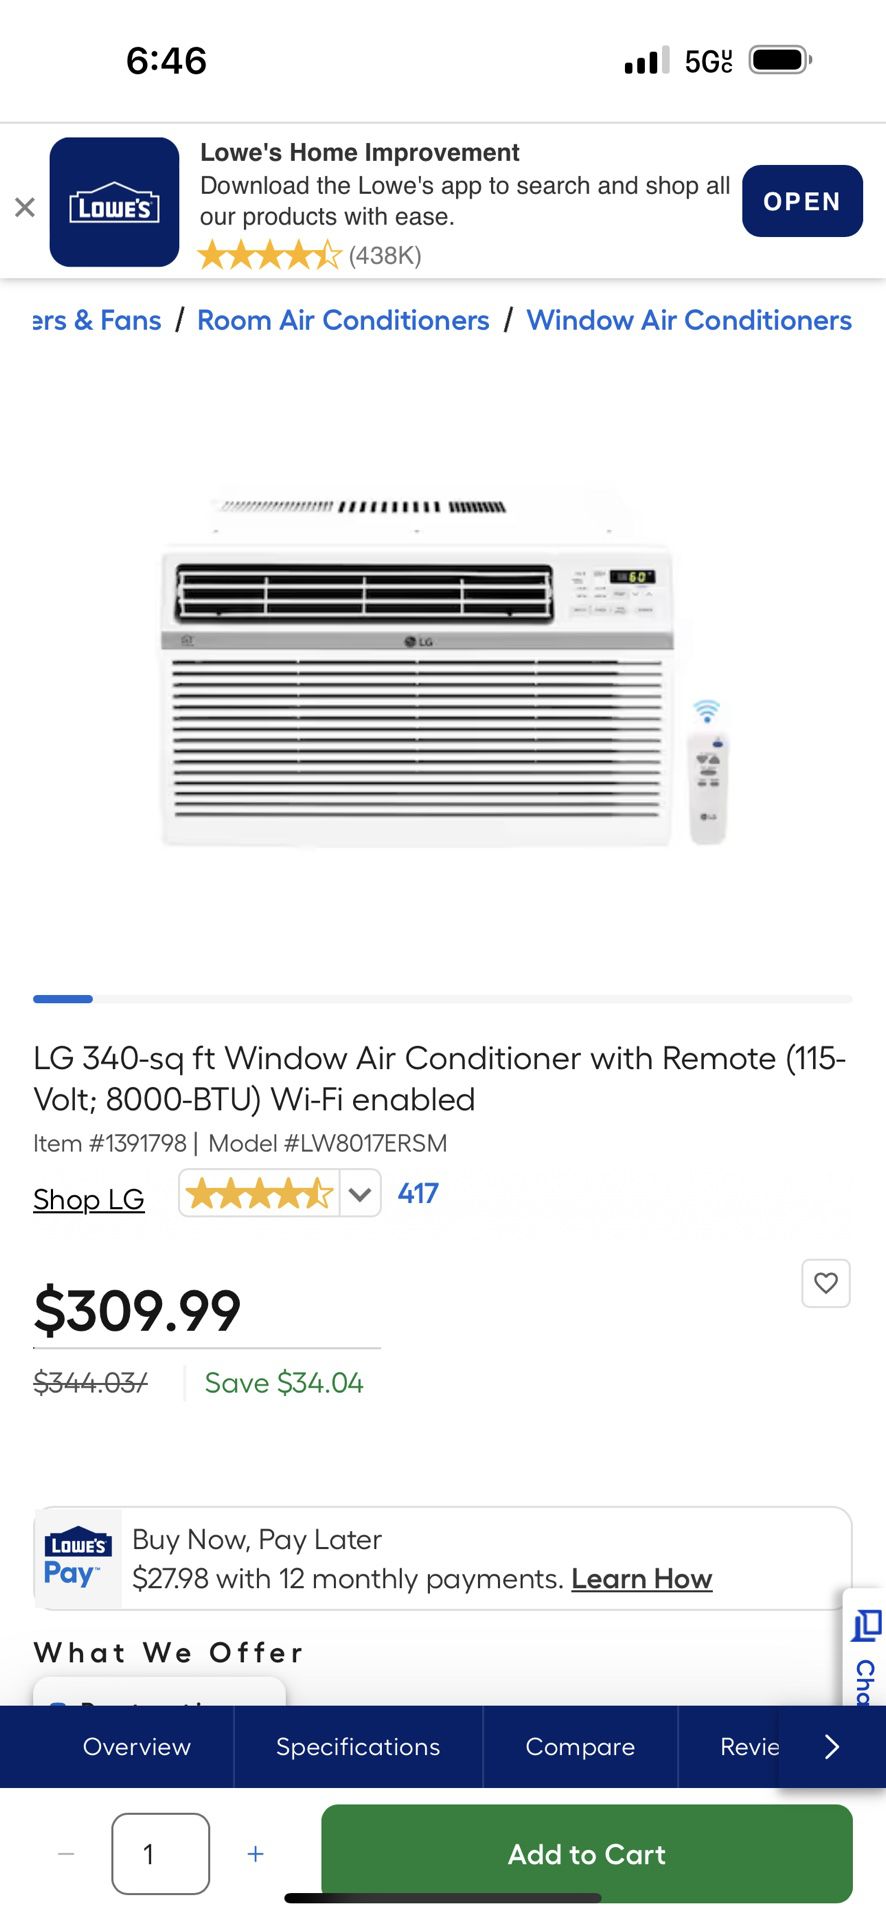 LG 340-sq ft Window Air Conditioner with Remote (115-Volt; 8000-BTU) Wi-Fi enabled